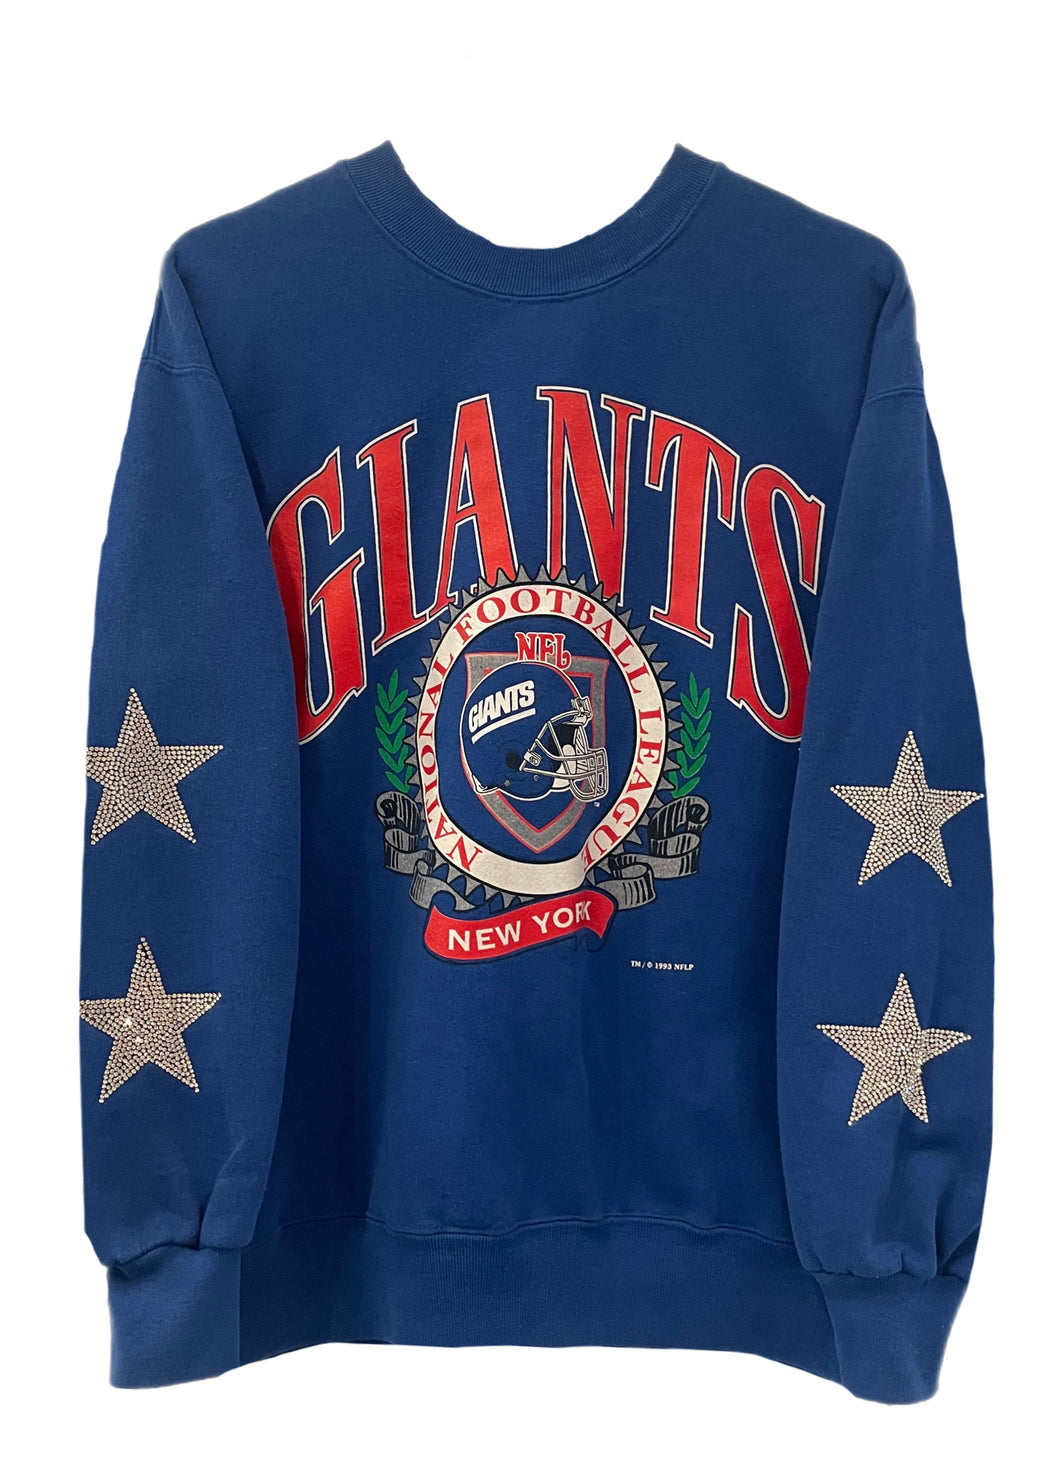 NY Giants, NFL One of a KIND Vintage Sweatshirt with Crystal Star Design.